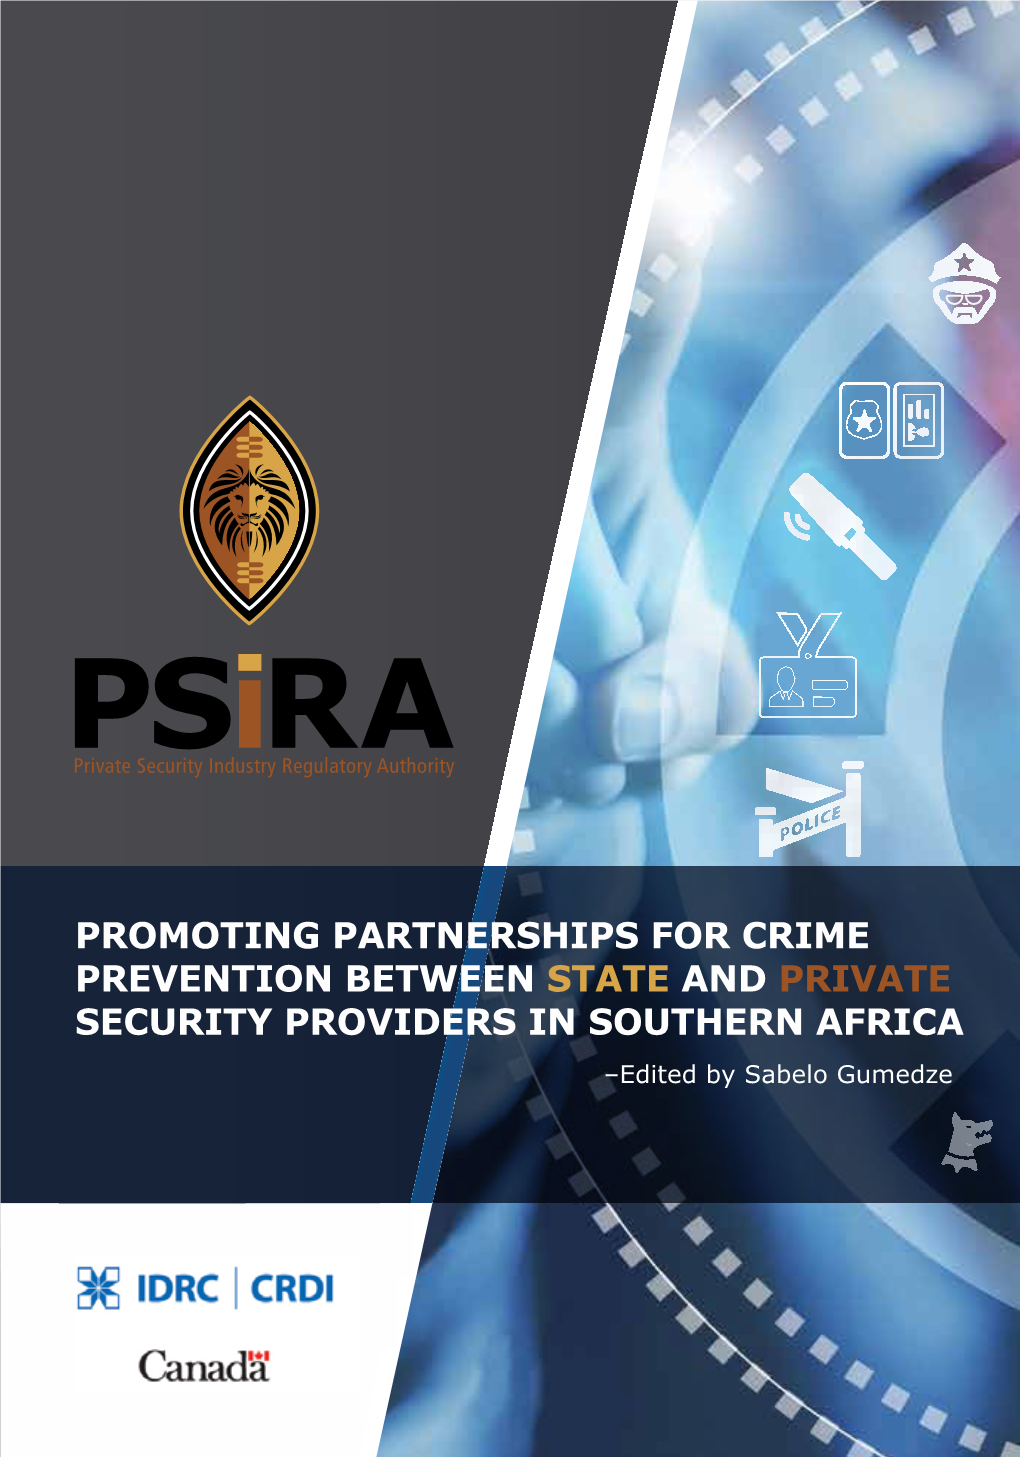 Promoting Partnerships for Crime Prevention Between State and Private Security Providers in Southern Africa